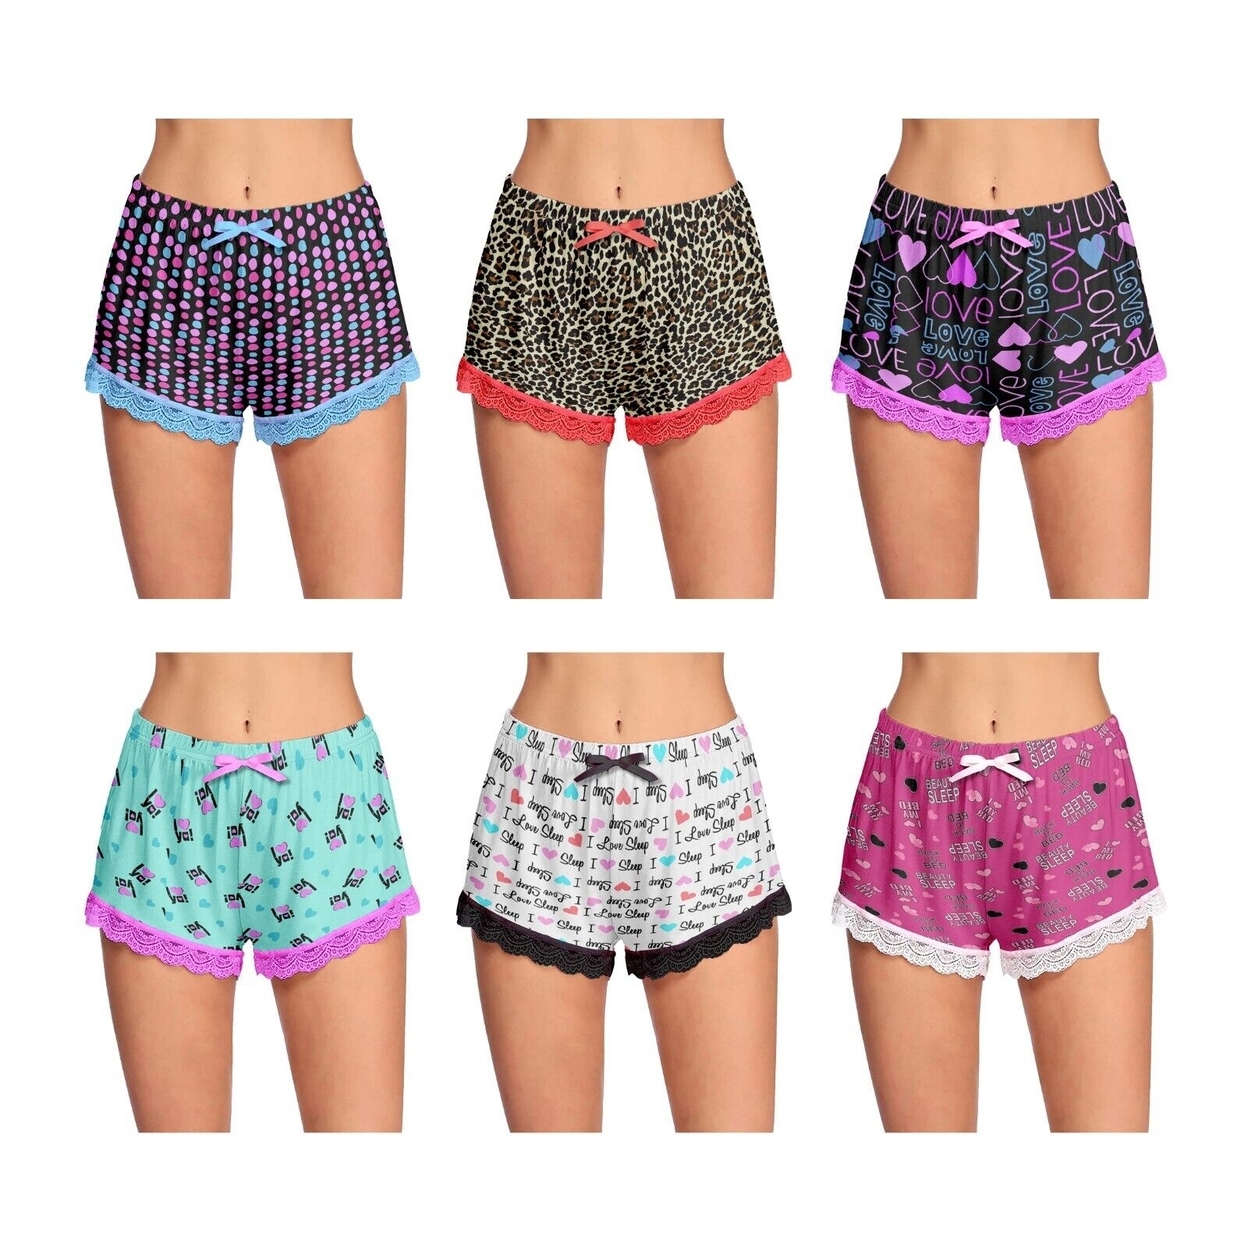 Multi-Pack: Women's Ultra-Soft Cozy Fun Printed Lace Trim Pajama Lounge Shorts - 2-pack, Large, Shapes